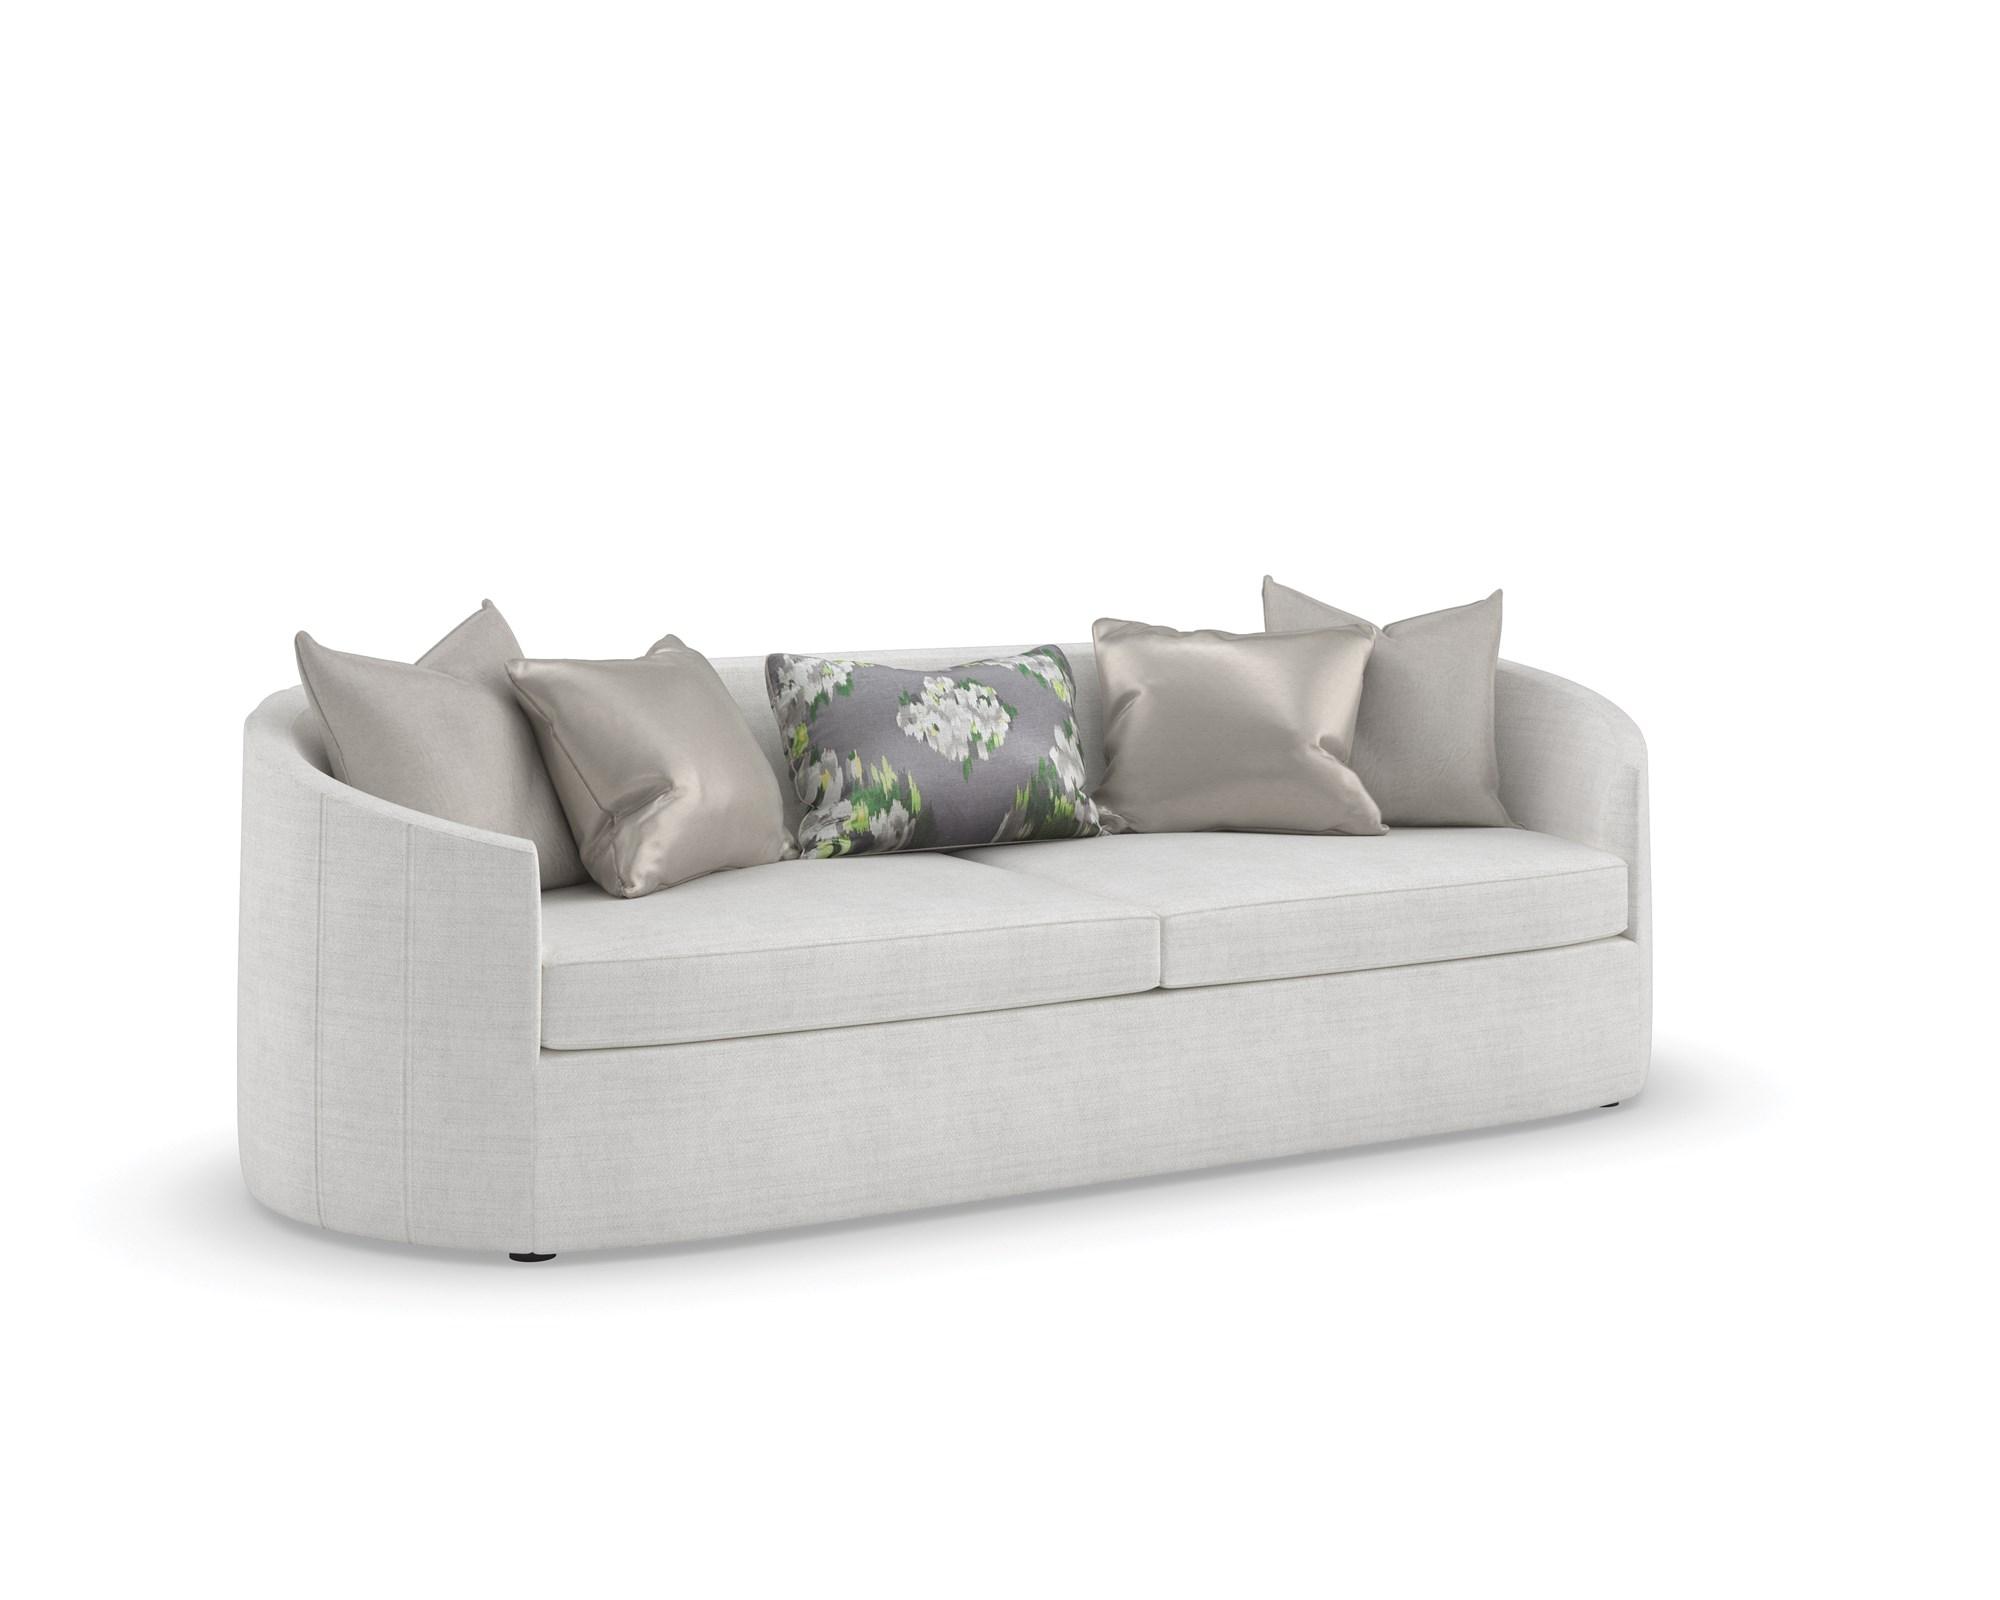 Contemporary Sofa YOU COMPLETE ME UPH-021-012-B in Light Gray Fabric